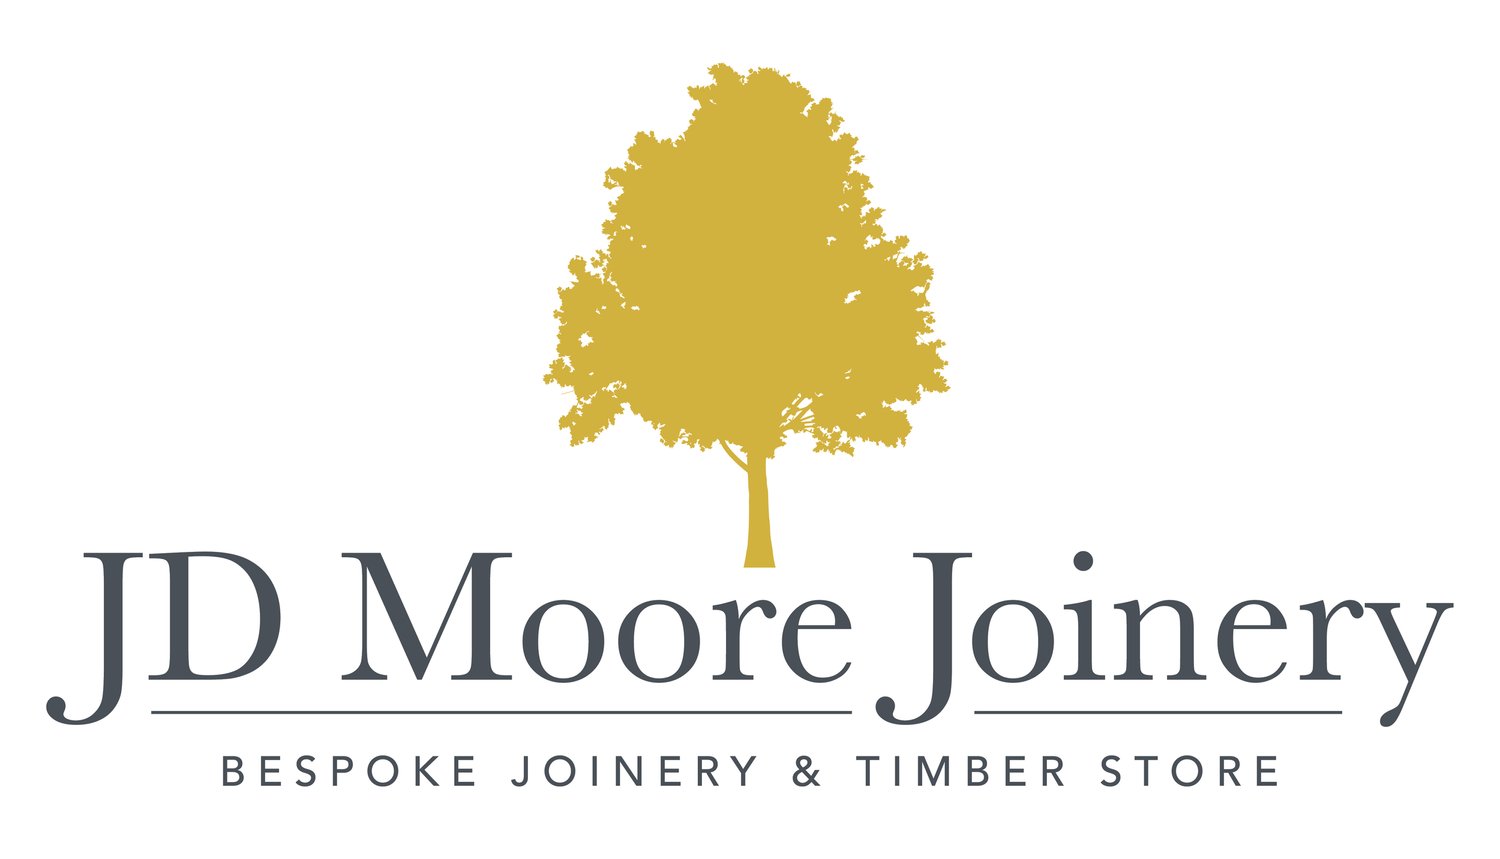 JD Moore - Bespoke Joinery &amp; Timber Store